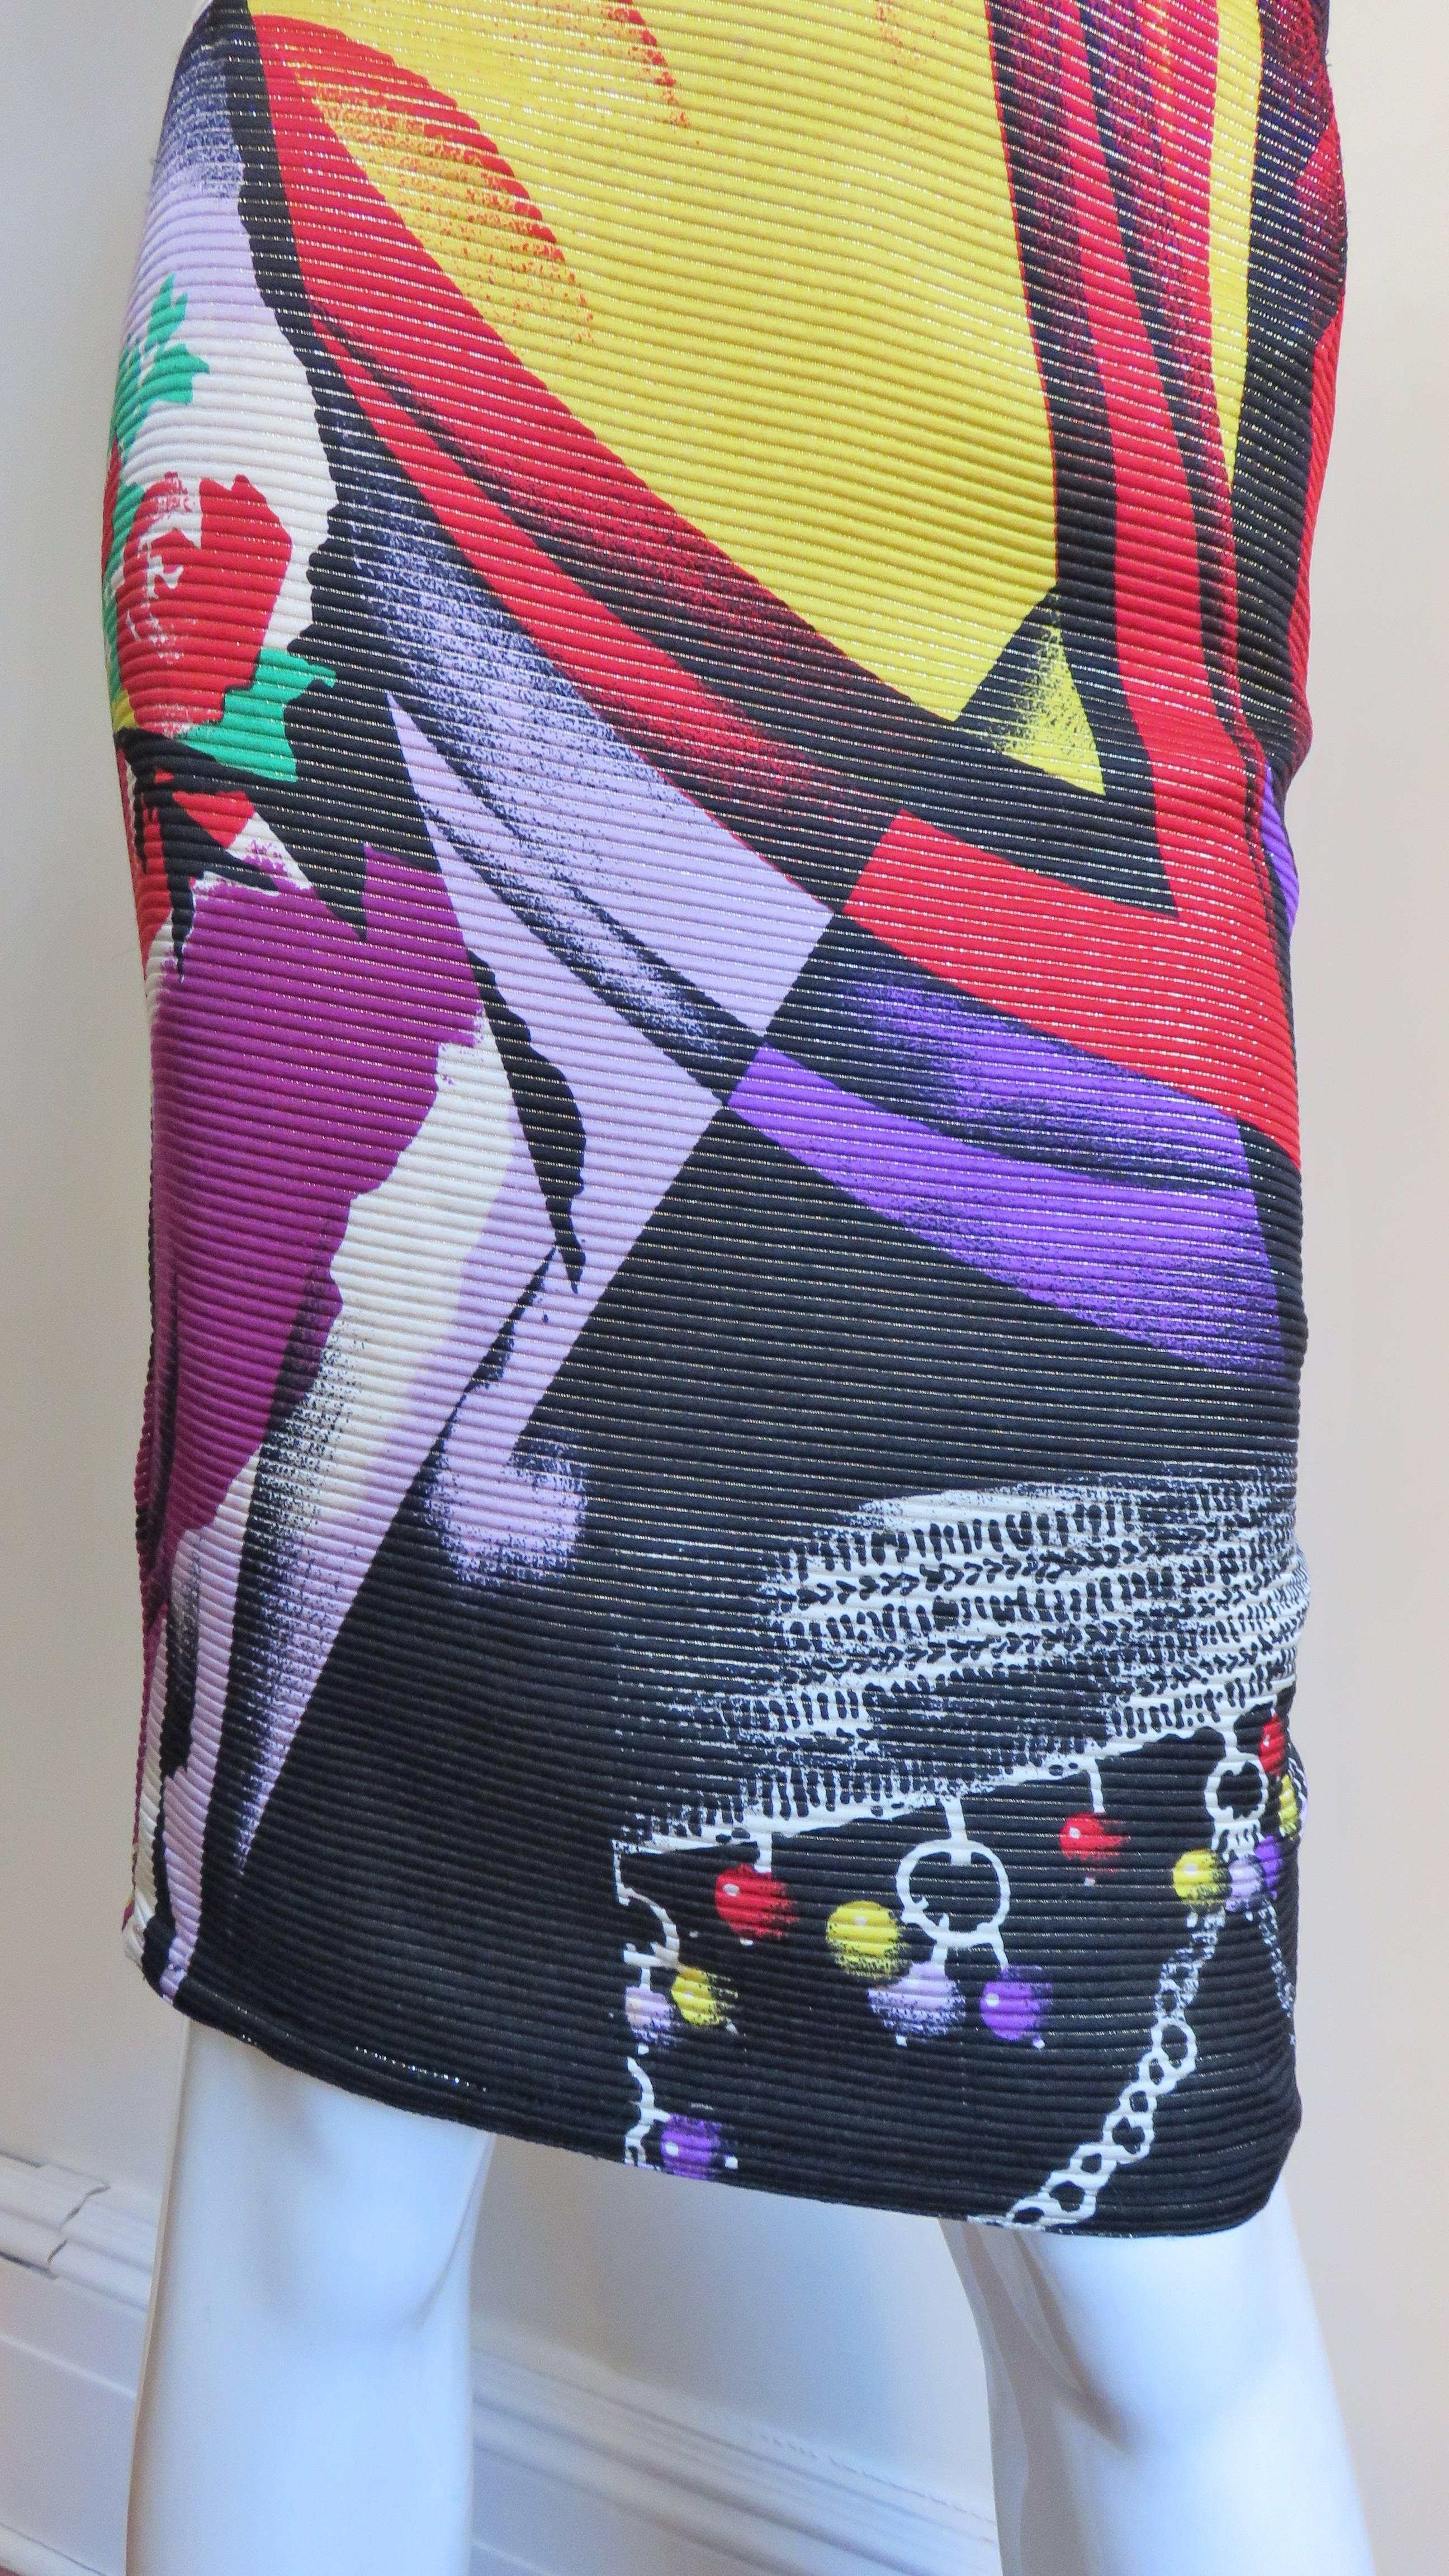 Gianni Versace Silk Skirt 1990s In Excellent Condition For Sale In Water Mill, NY